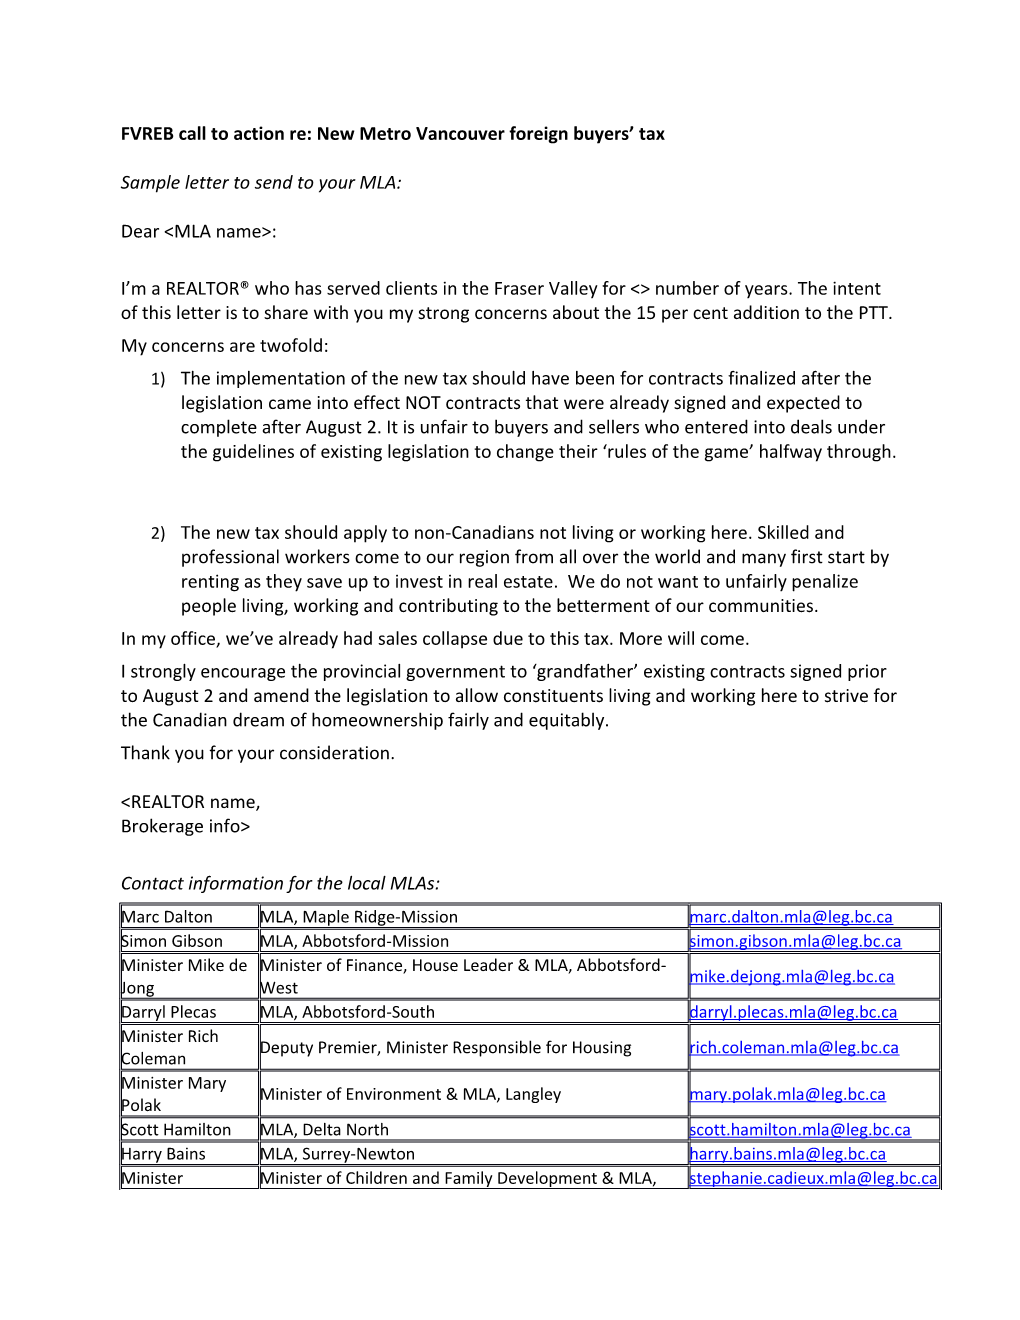 FVREB Call to Action Re: New Metro Vancouver Foreign Buyers Tax